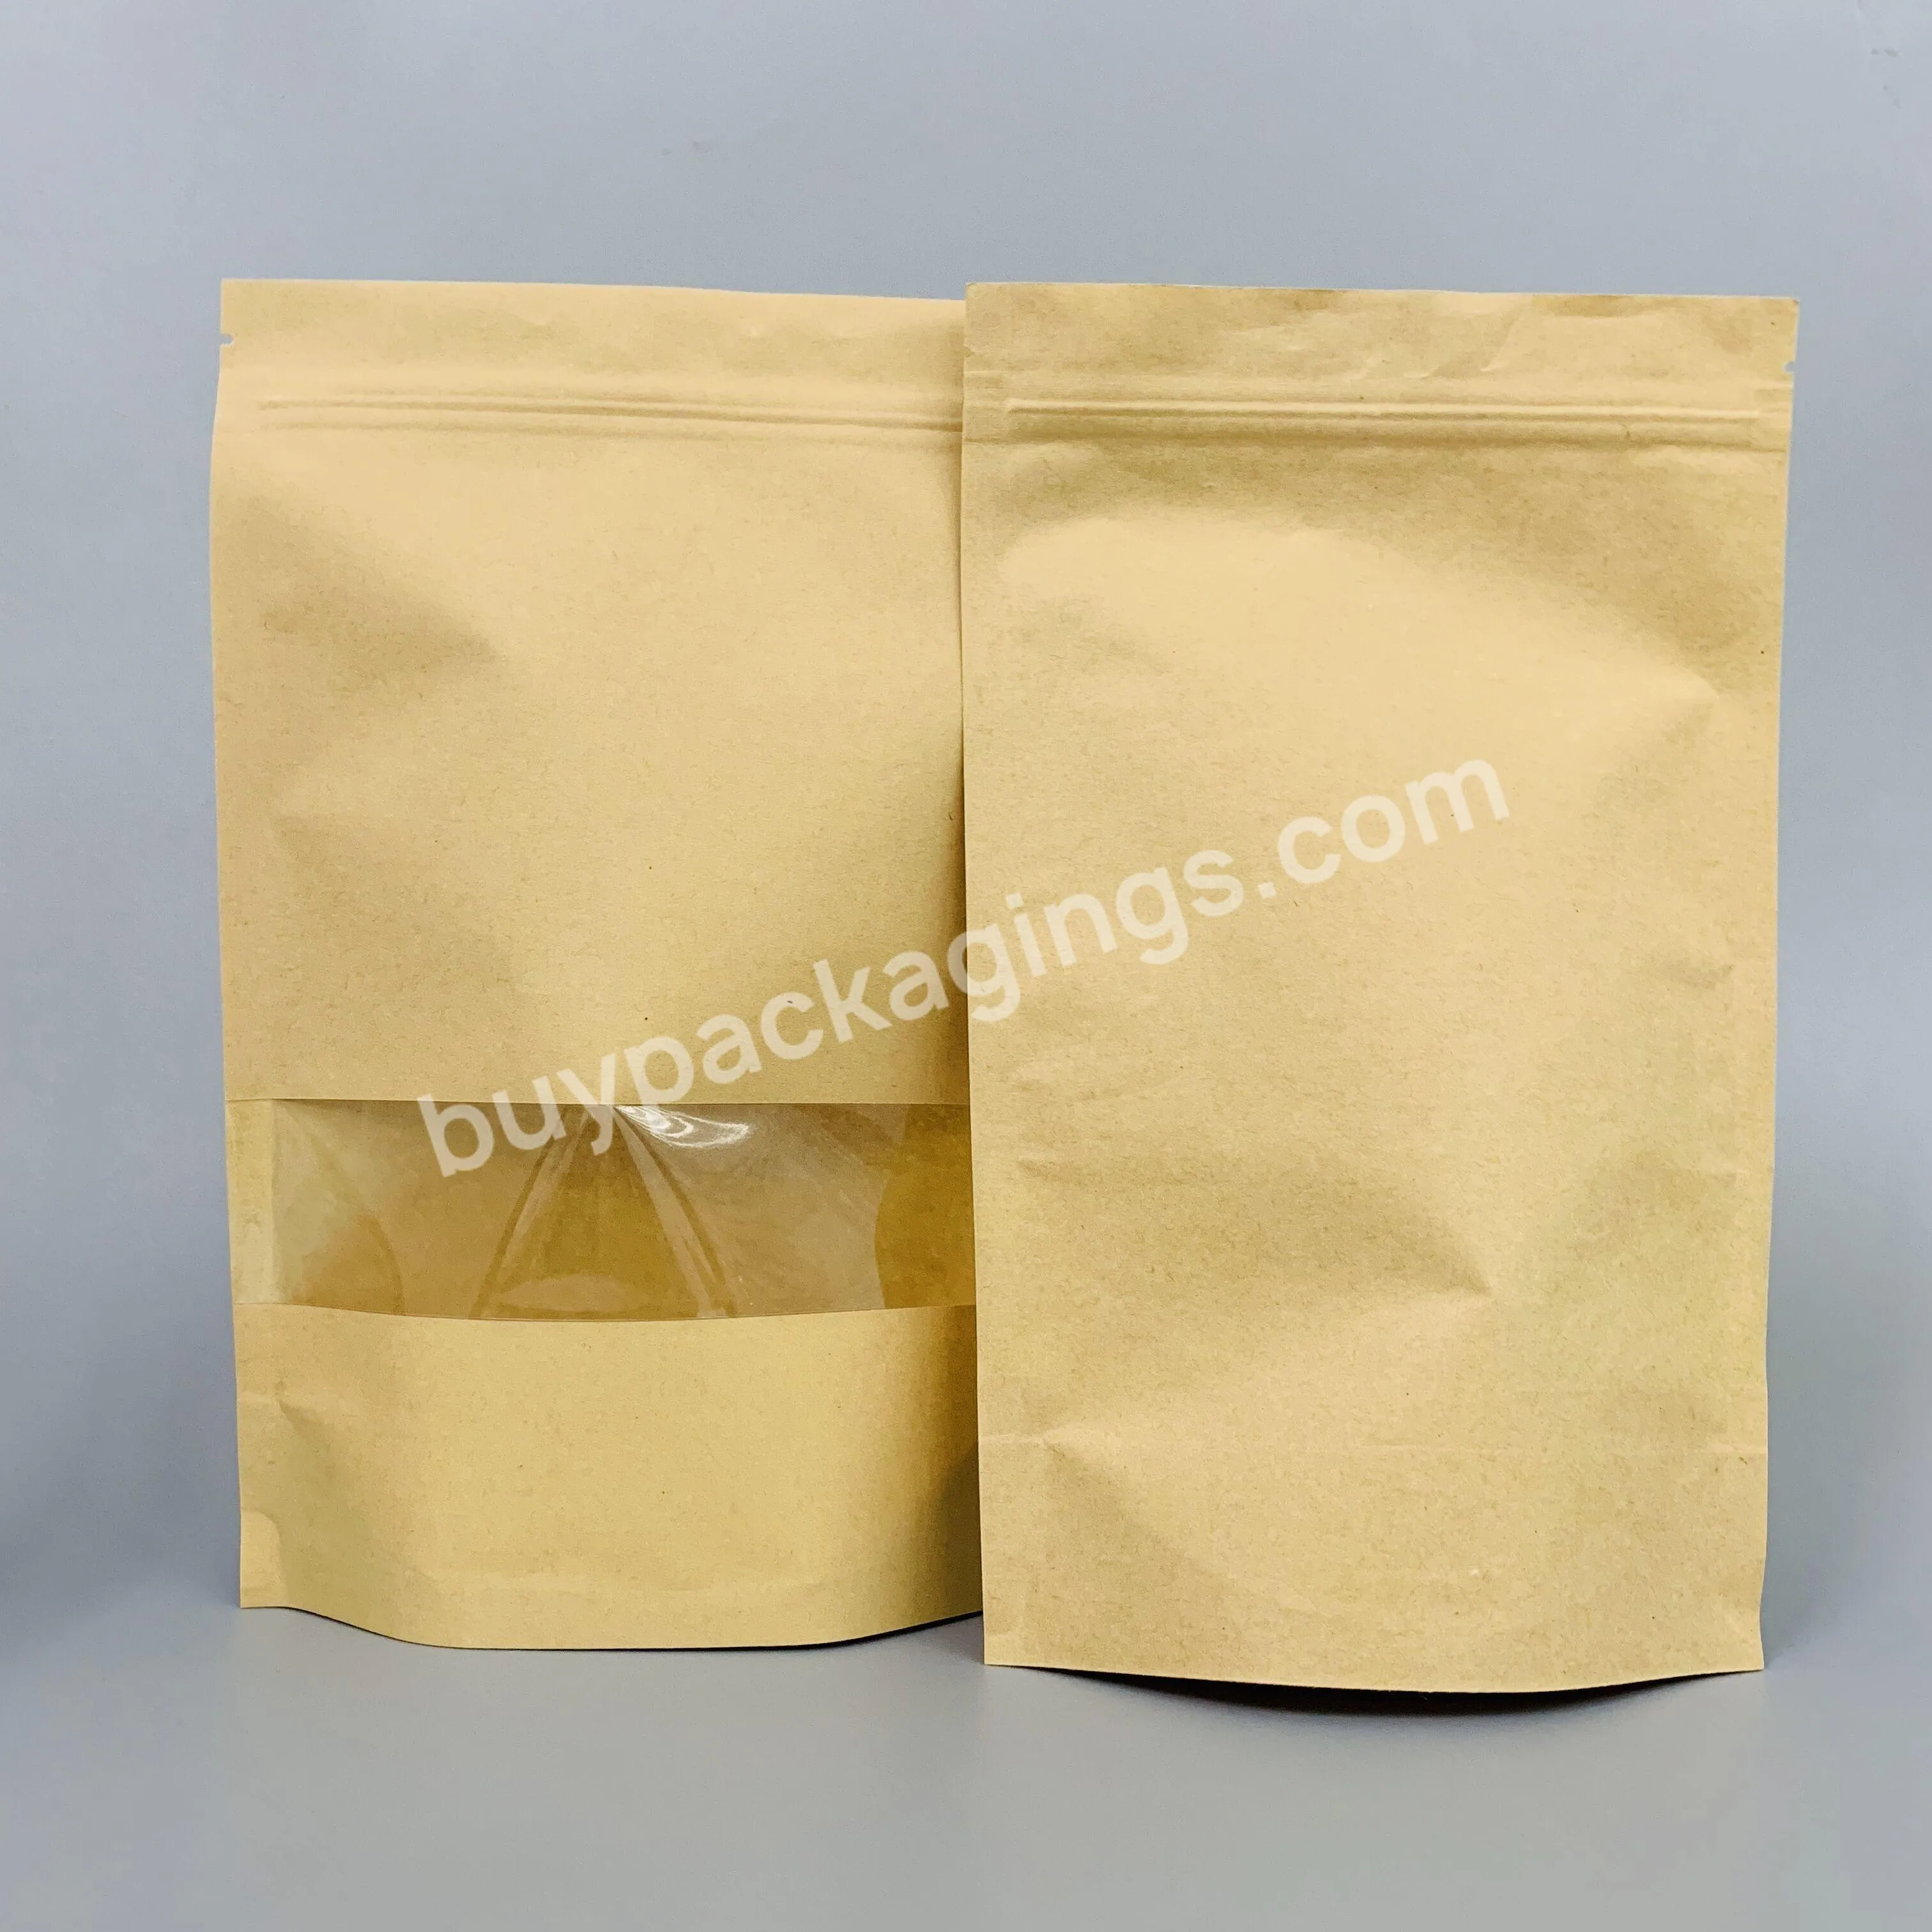 Doypack Resealable Ziplock Standing Up Pouches Brown Paper Bag With Window For Food